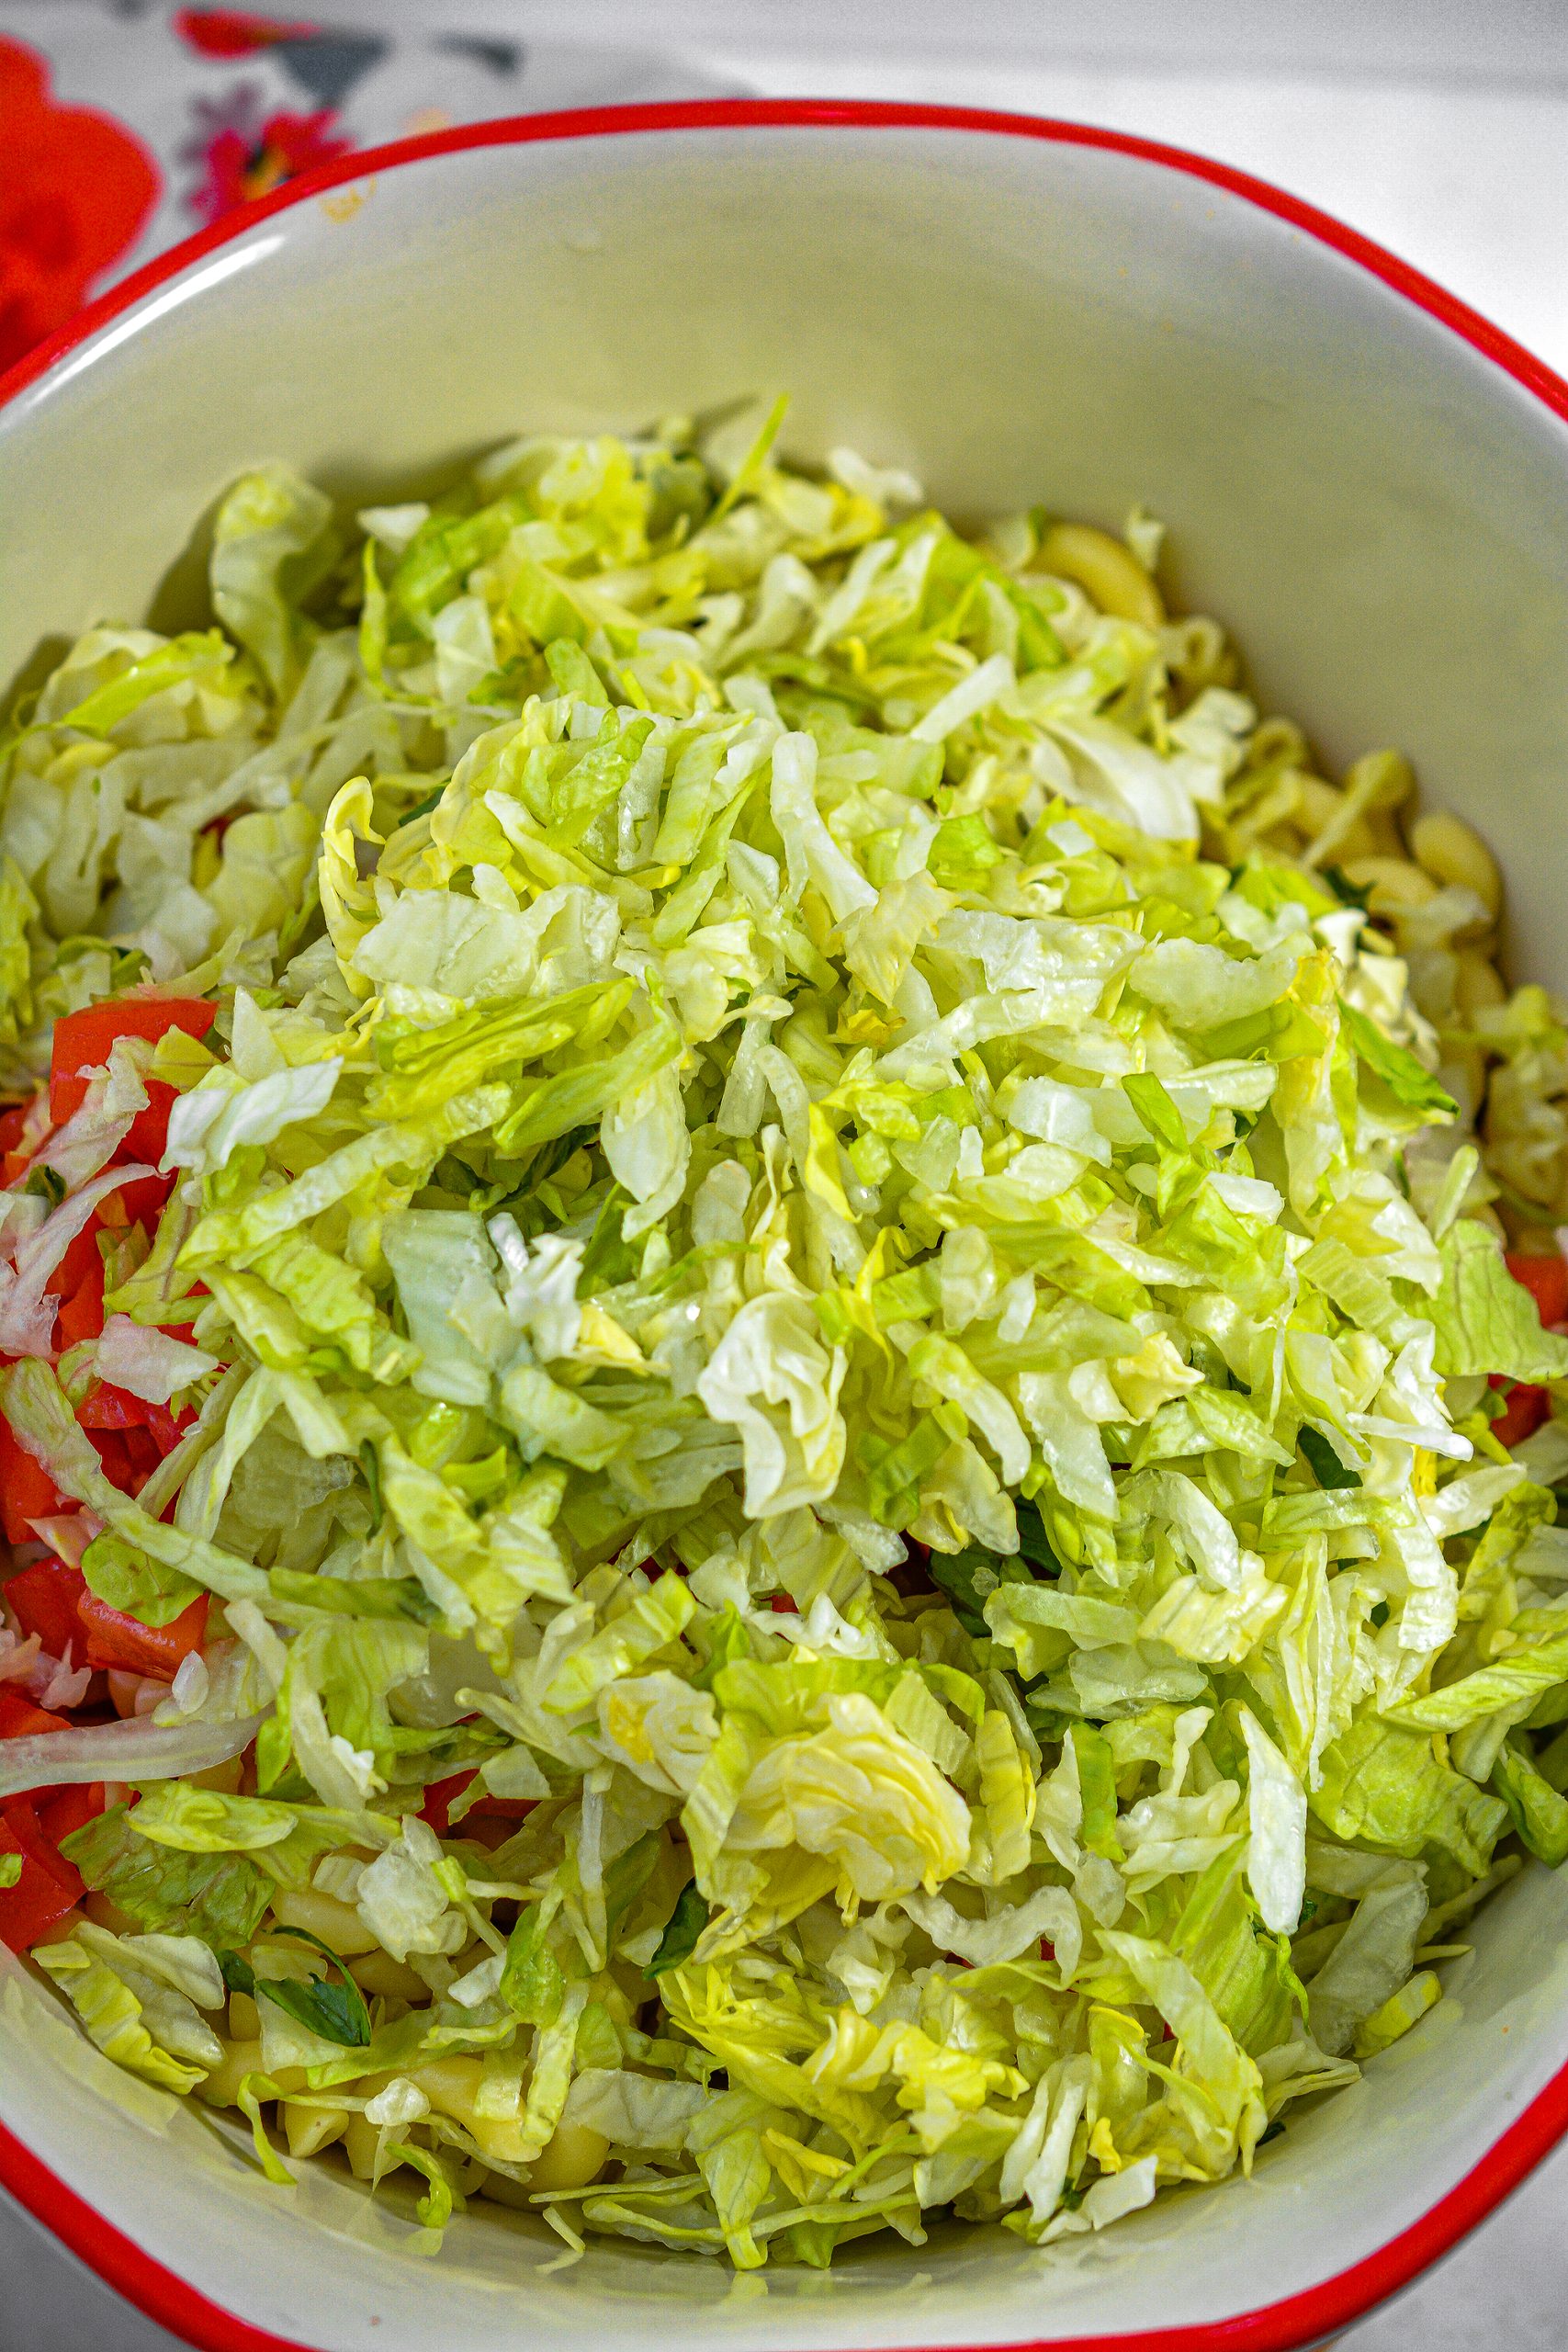 In a large mixing bowl, combine the macaroni, lettuce, tomato and bacon, stir to combine well.